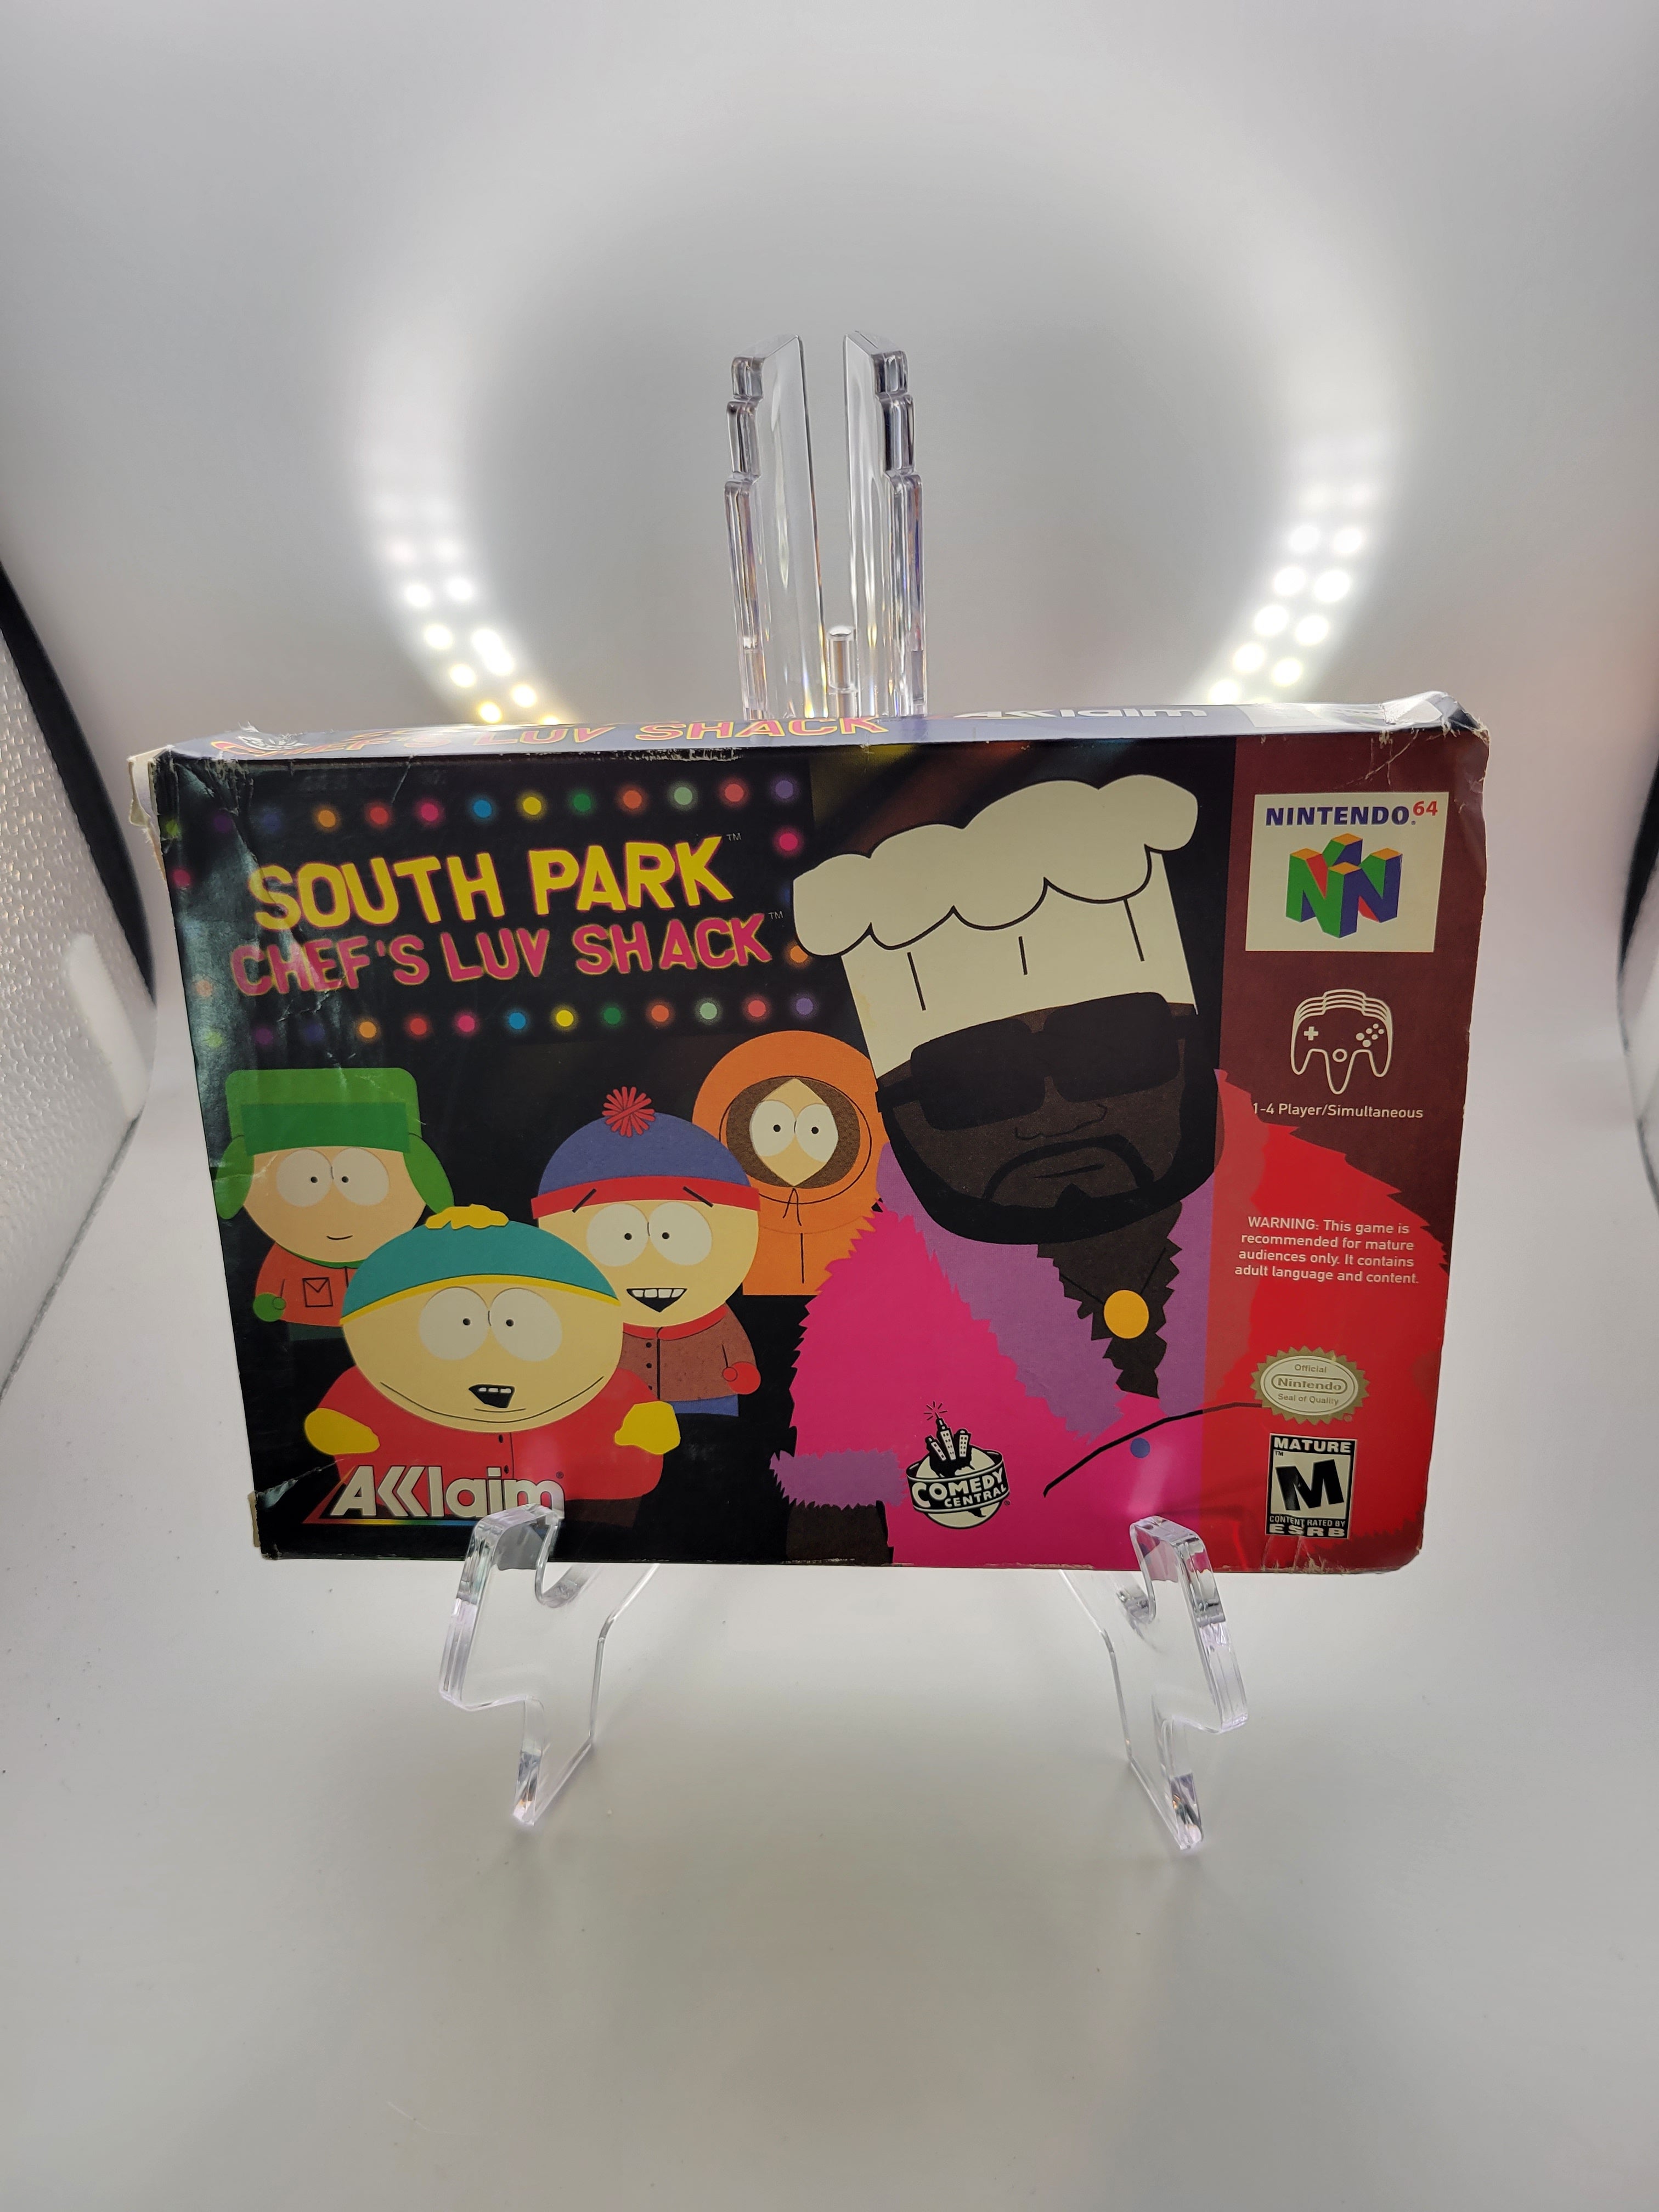 South Park Chef's Luv Shack Nintendo 64 Game And Box – The Retro 